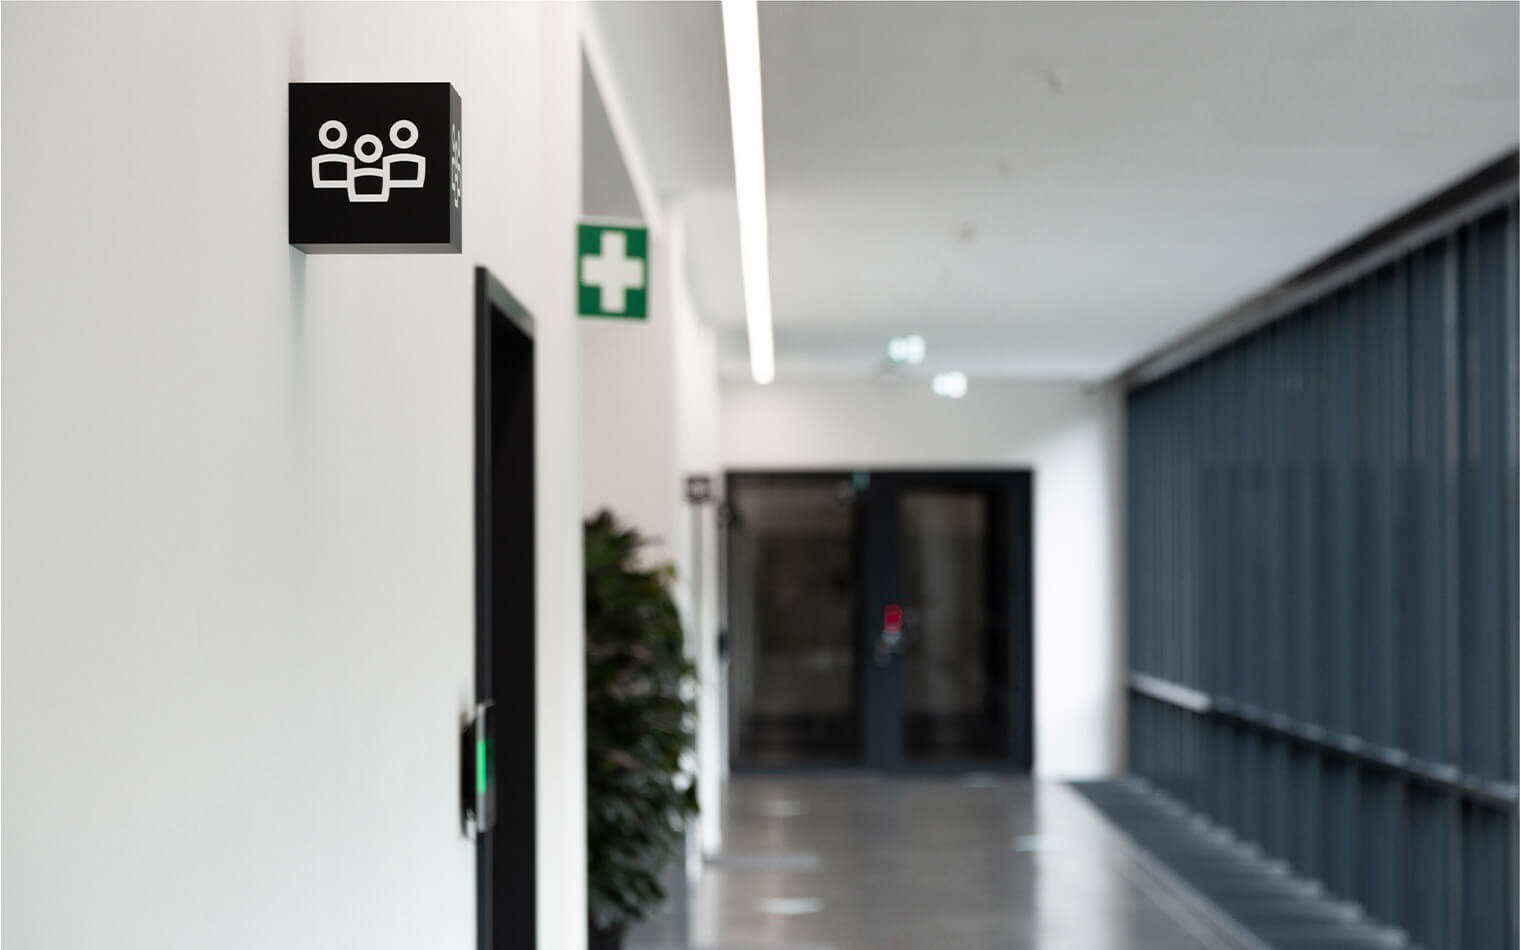 This photo shows a cube hanging in the hallway with the meeting room pictogram.